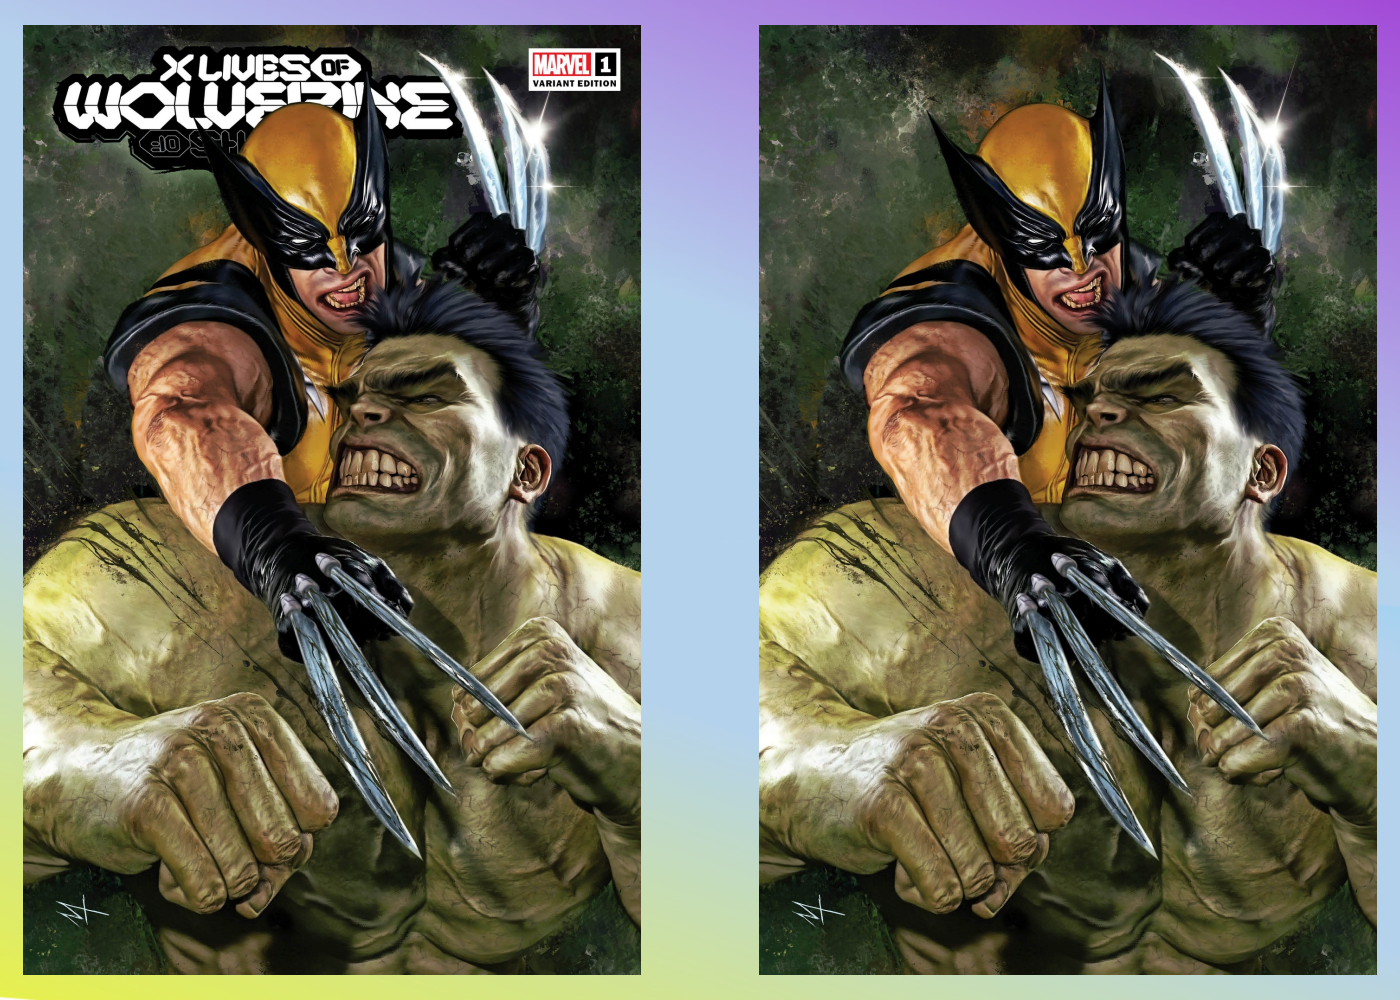 X Lives of Wolverine #1 The 616 Exclusive Variant Set By Marco Turini Pre-Order Deposit